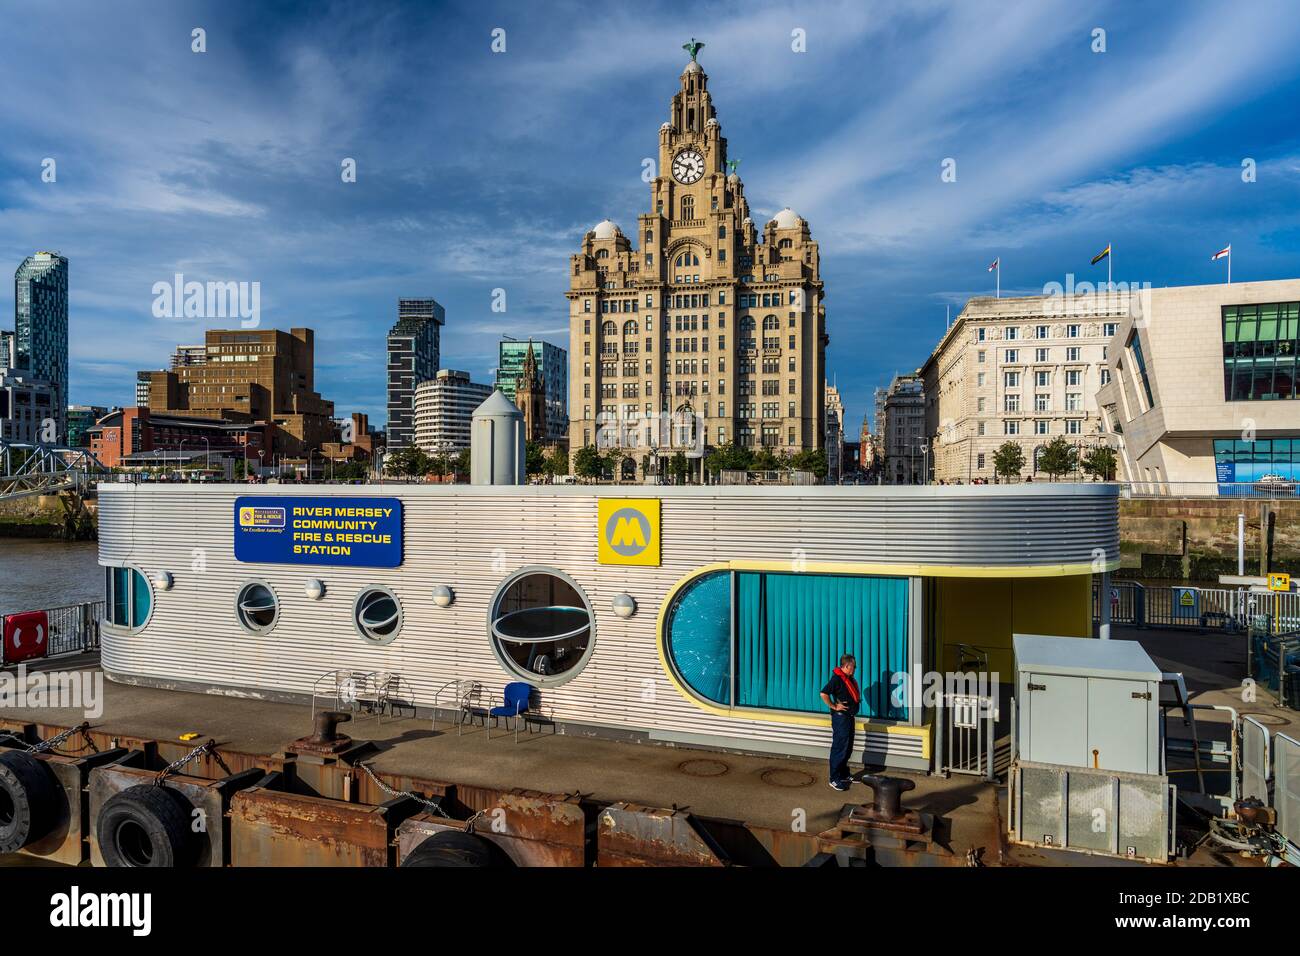 River Mersey Community Fire and Rescue Station Pier Head Liverpool - Liverpool Fire and Rescue Service station fluviale. Liverpool Marine Rescue Unit. Banque D'Images